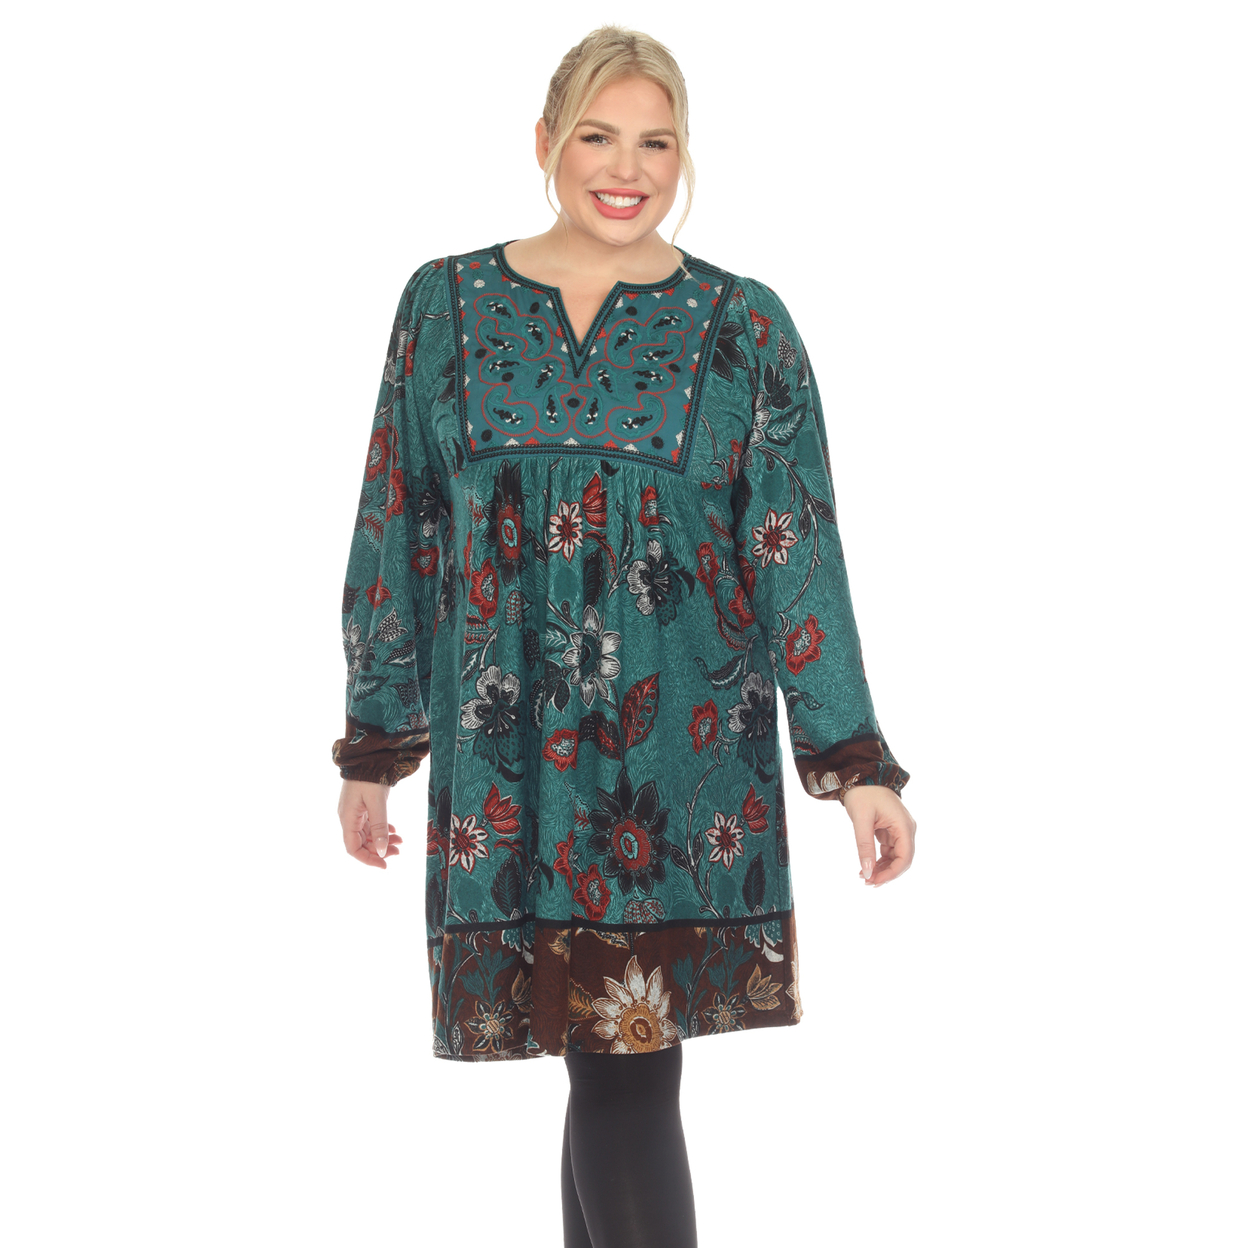 White Mark Women's Floral Paisley Sweater Dress - Teal, 2x